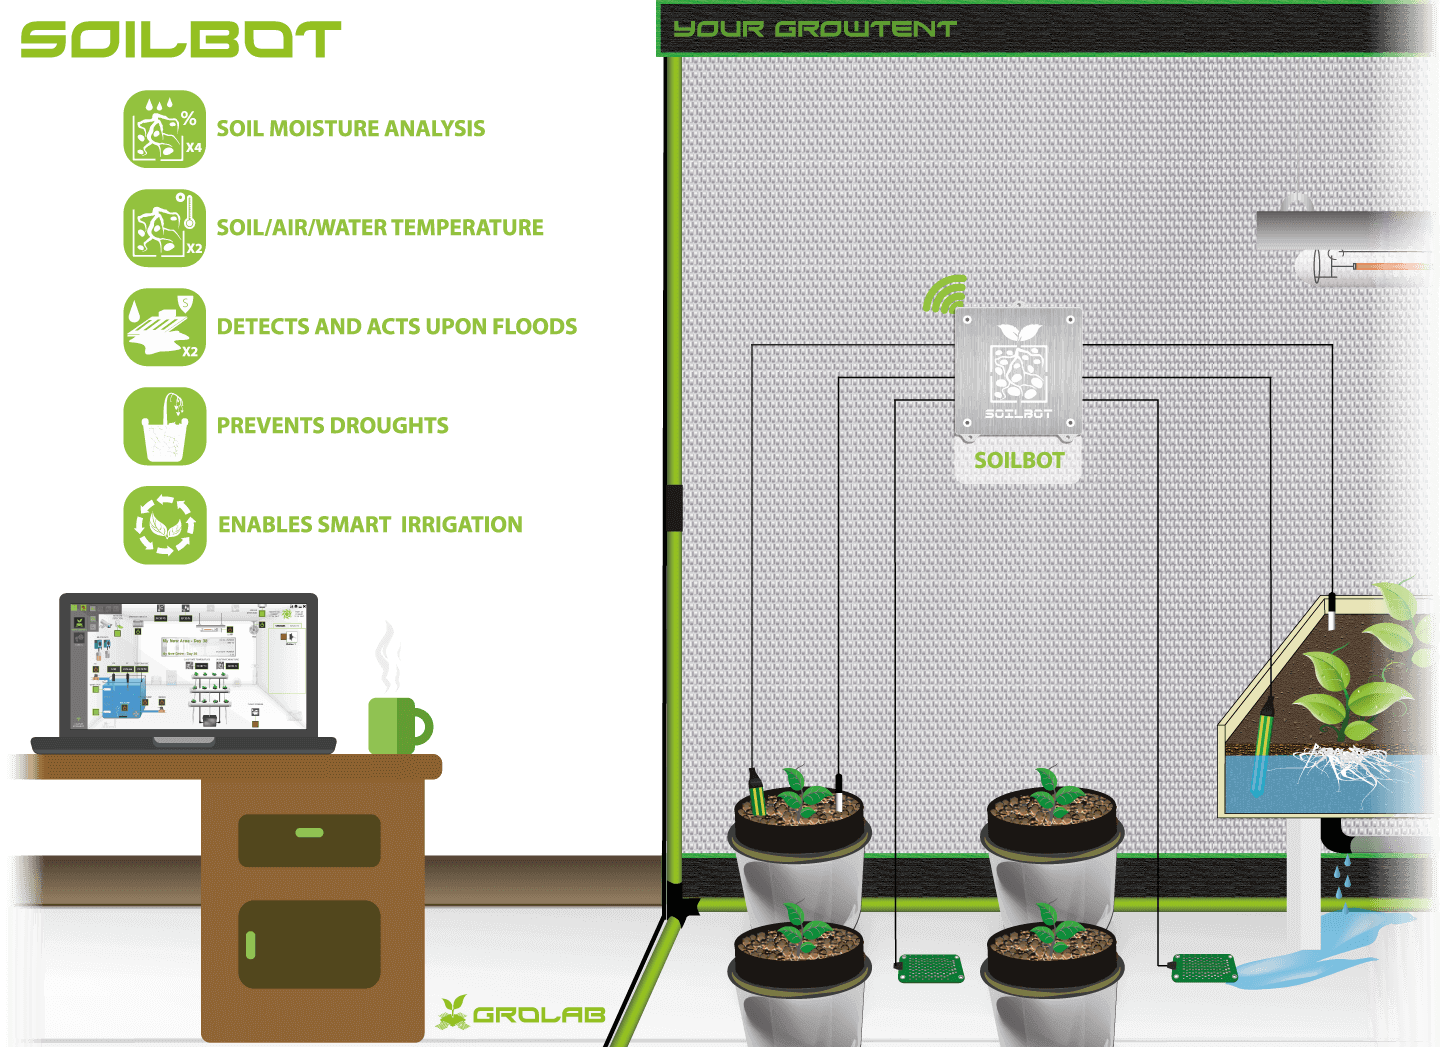 SoilBot configuration schematic example, the GroLab™ grow controller substrate analyzer, measure soil moisture, temperature and flood detection in two distinct grows